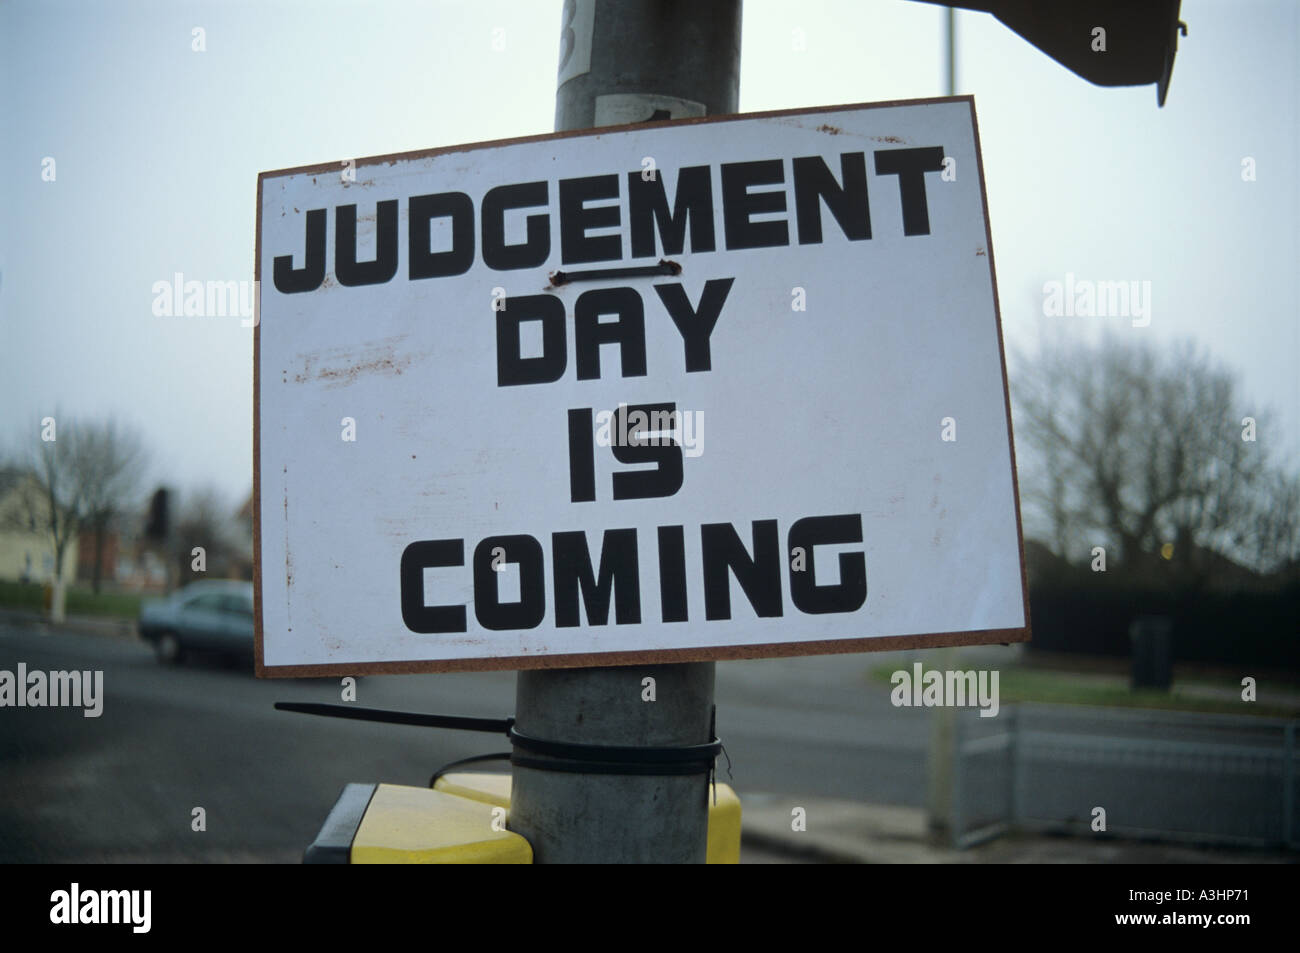 Judgement day is coming sign Stock Photo